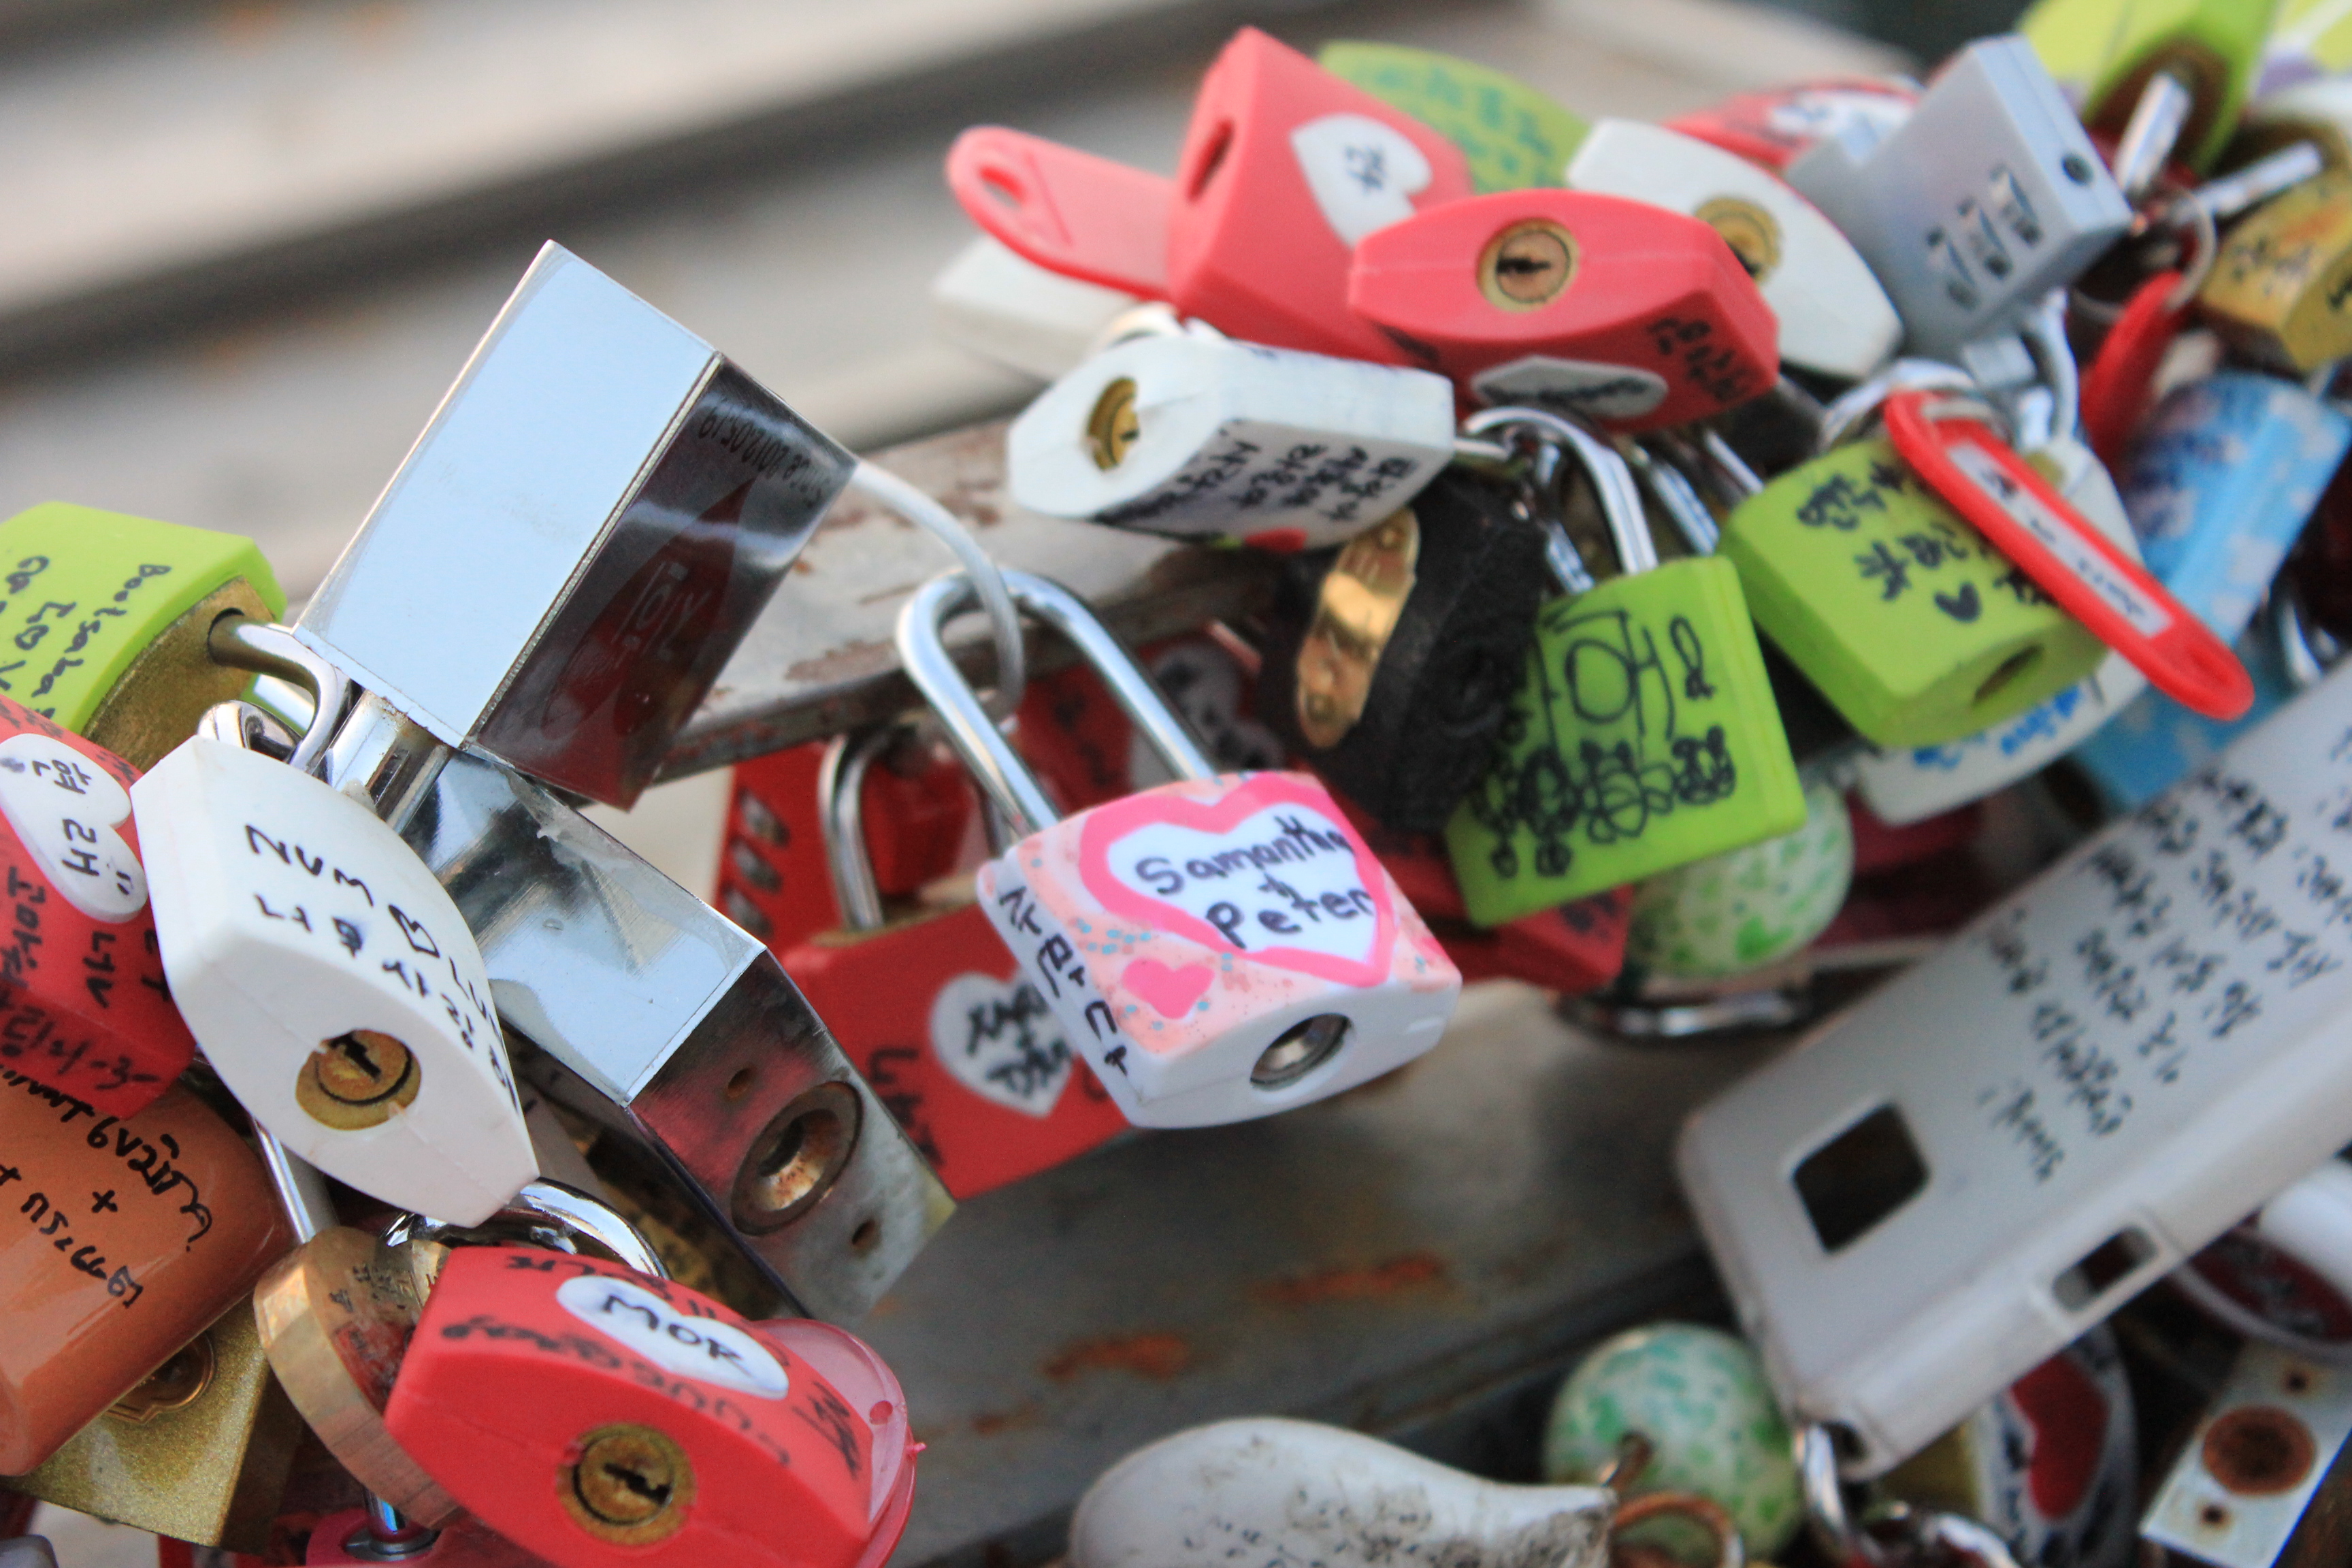 Love locks | Well see you later...